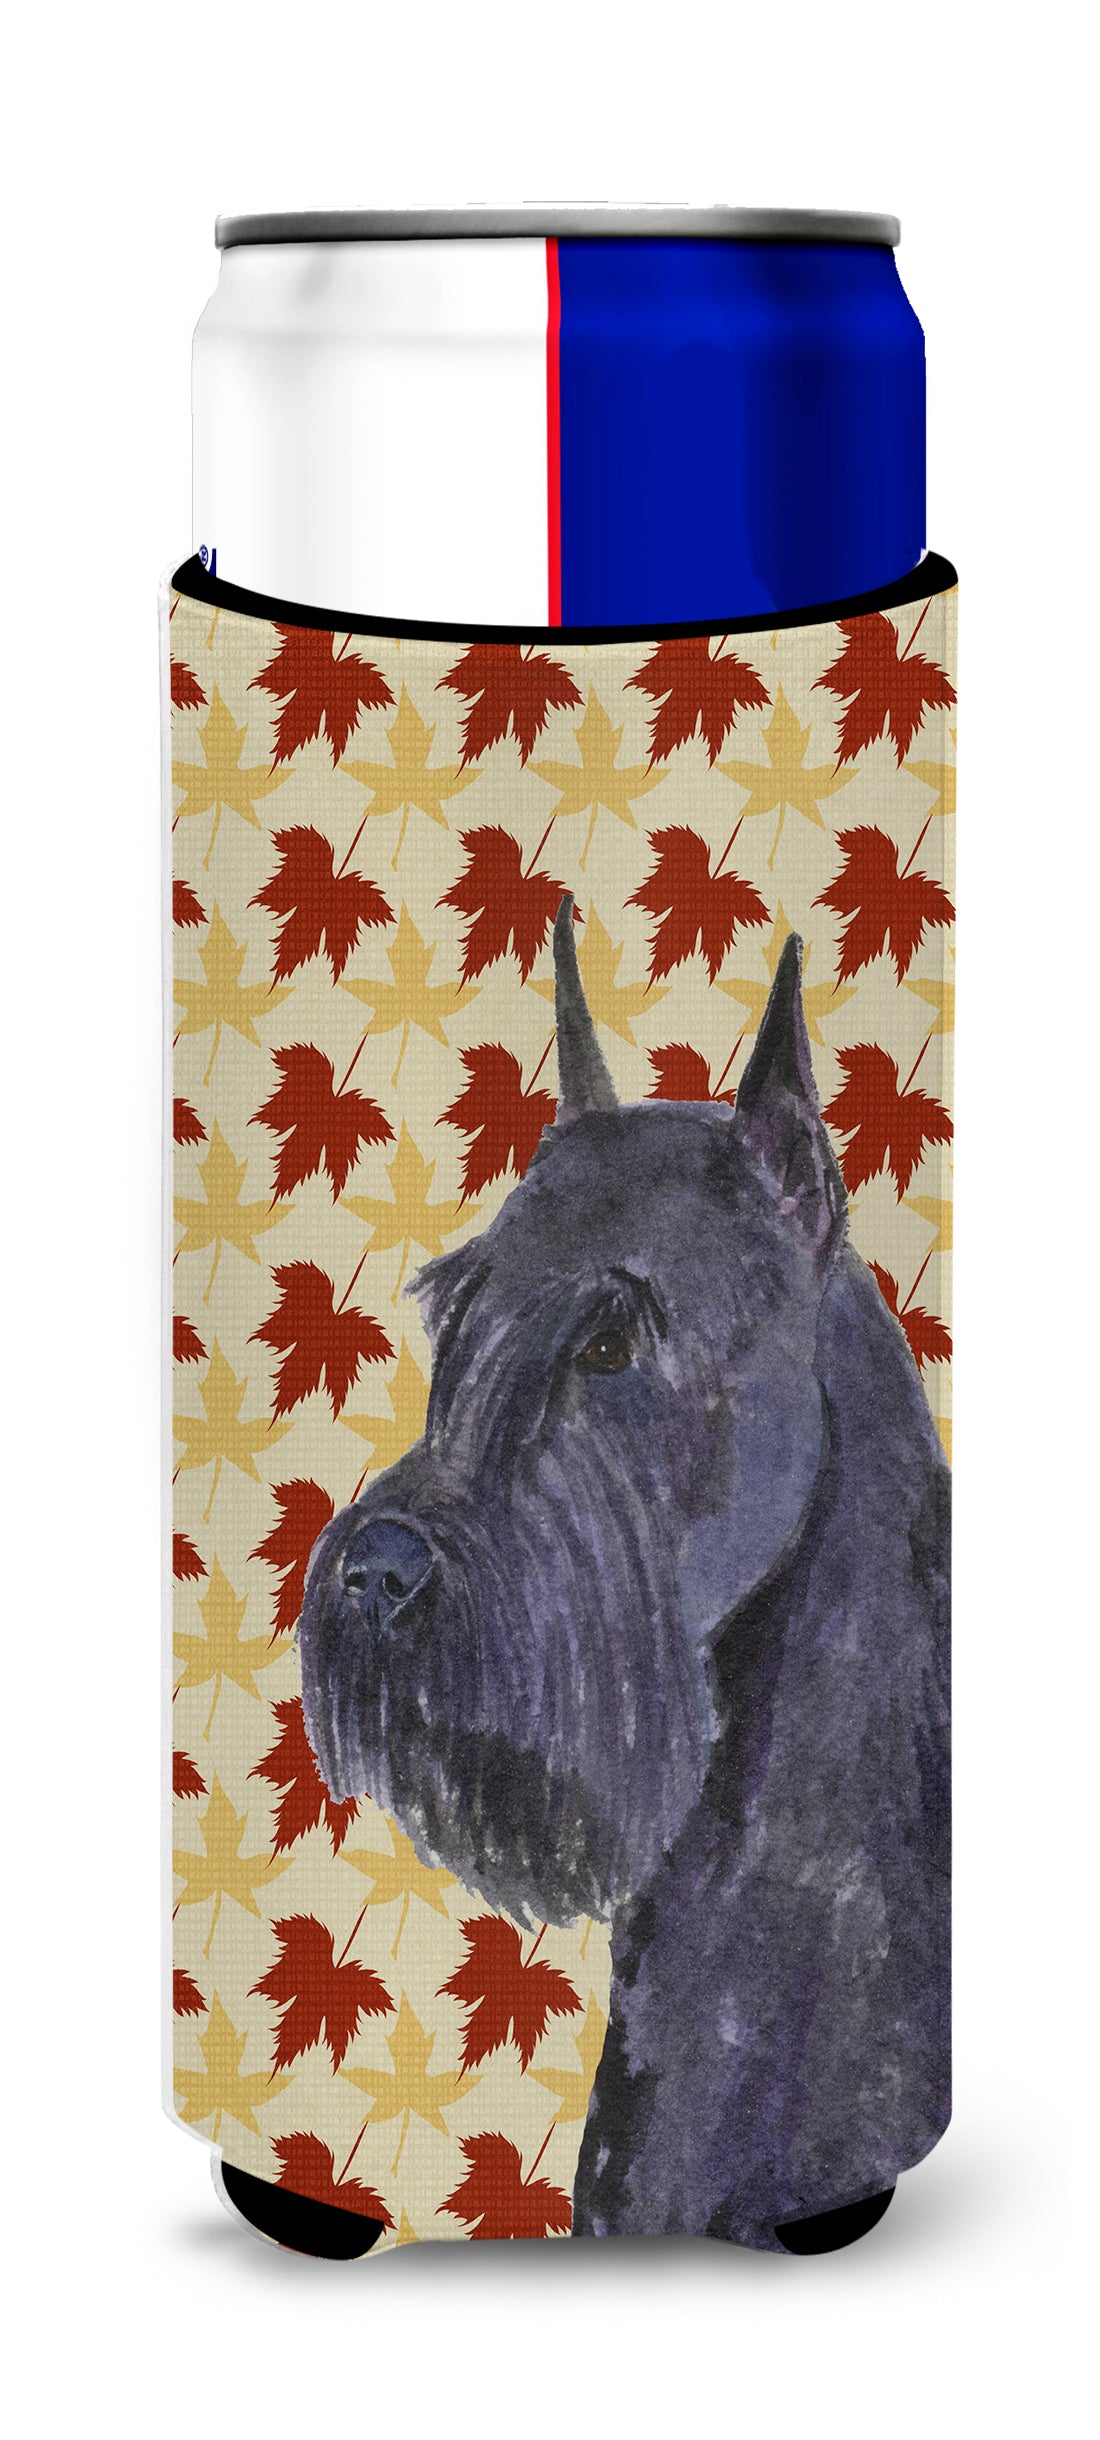 Schnauzer Giant Fall Leaves Portrait Ultra Beverage Insulators for slim cans SS4333MUK.